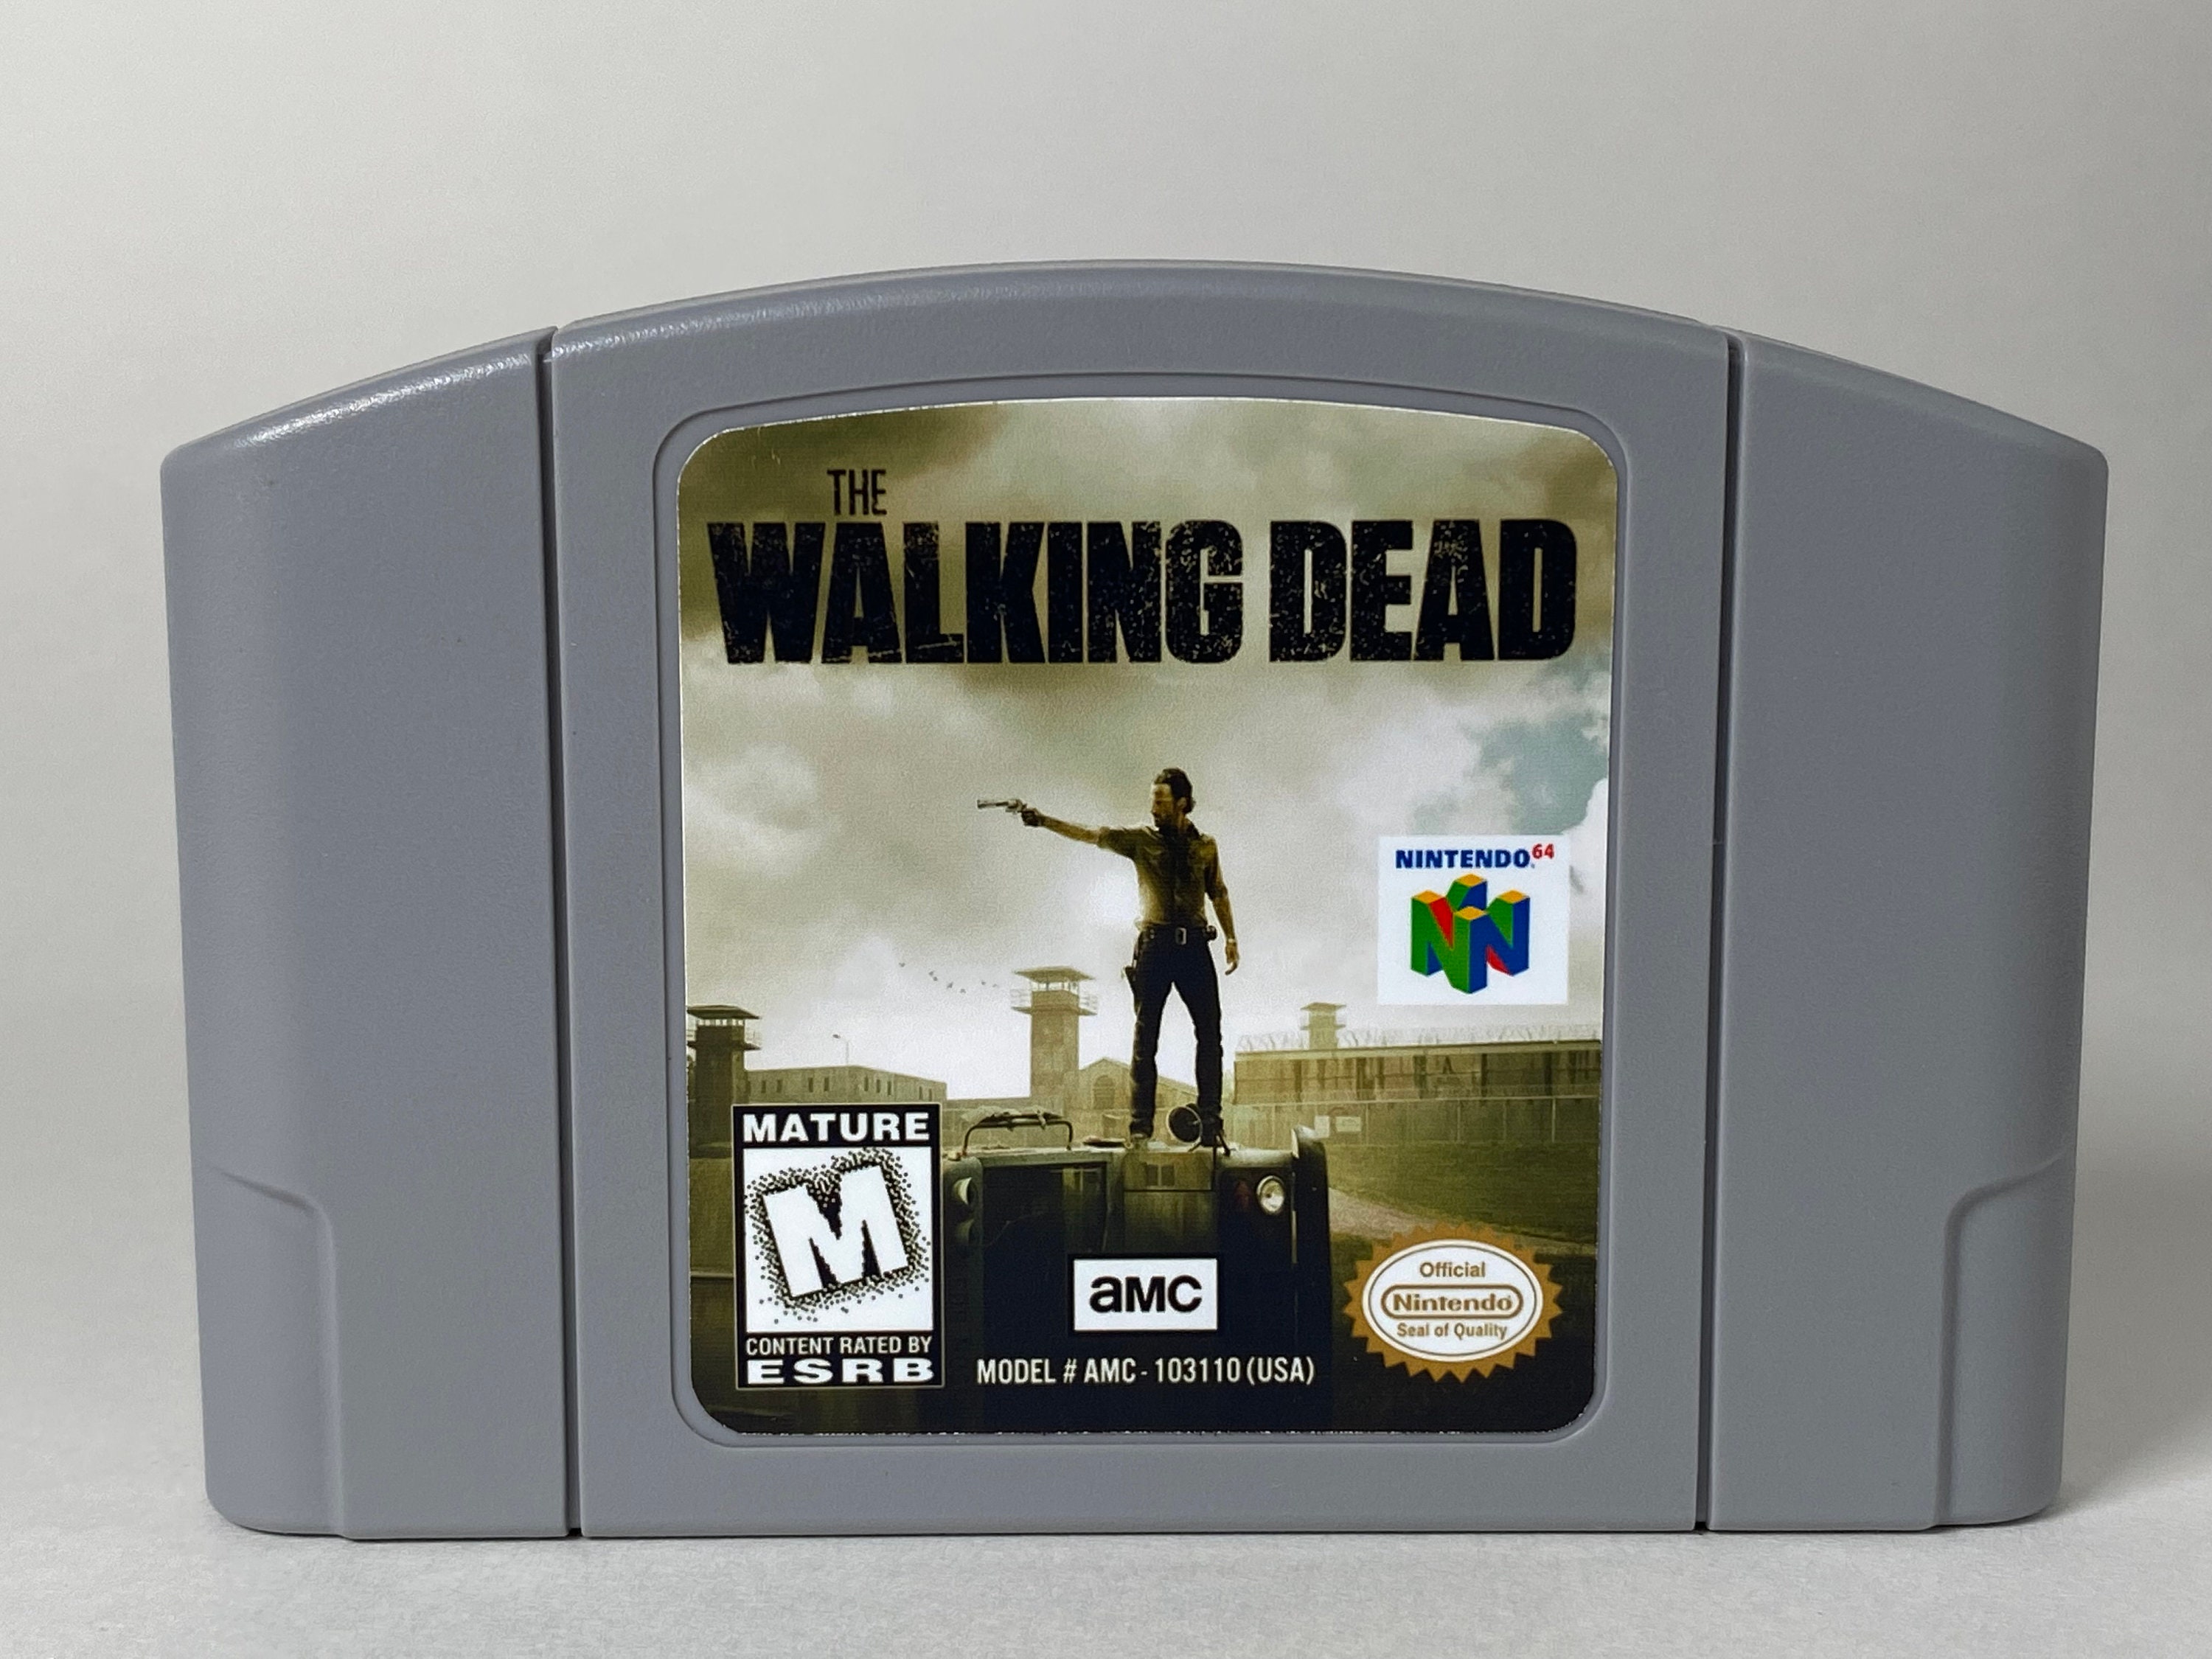 Custom N64 the Walking Dead Nintendo 64 Video Game Cartridge, Award Winning  TV Show Parody Display Item With or Without Stand 